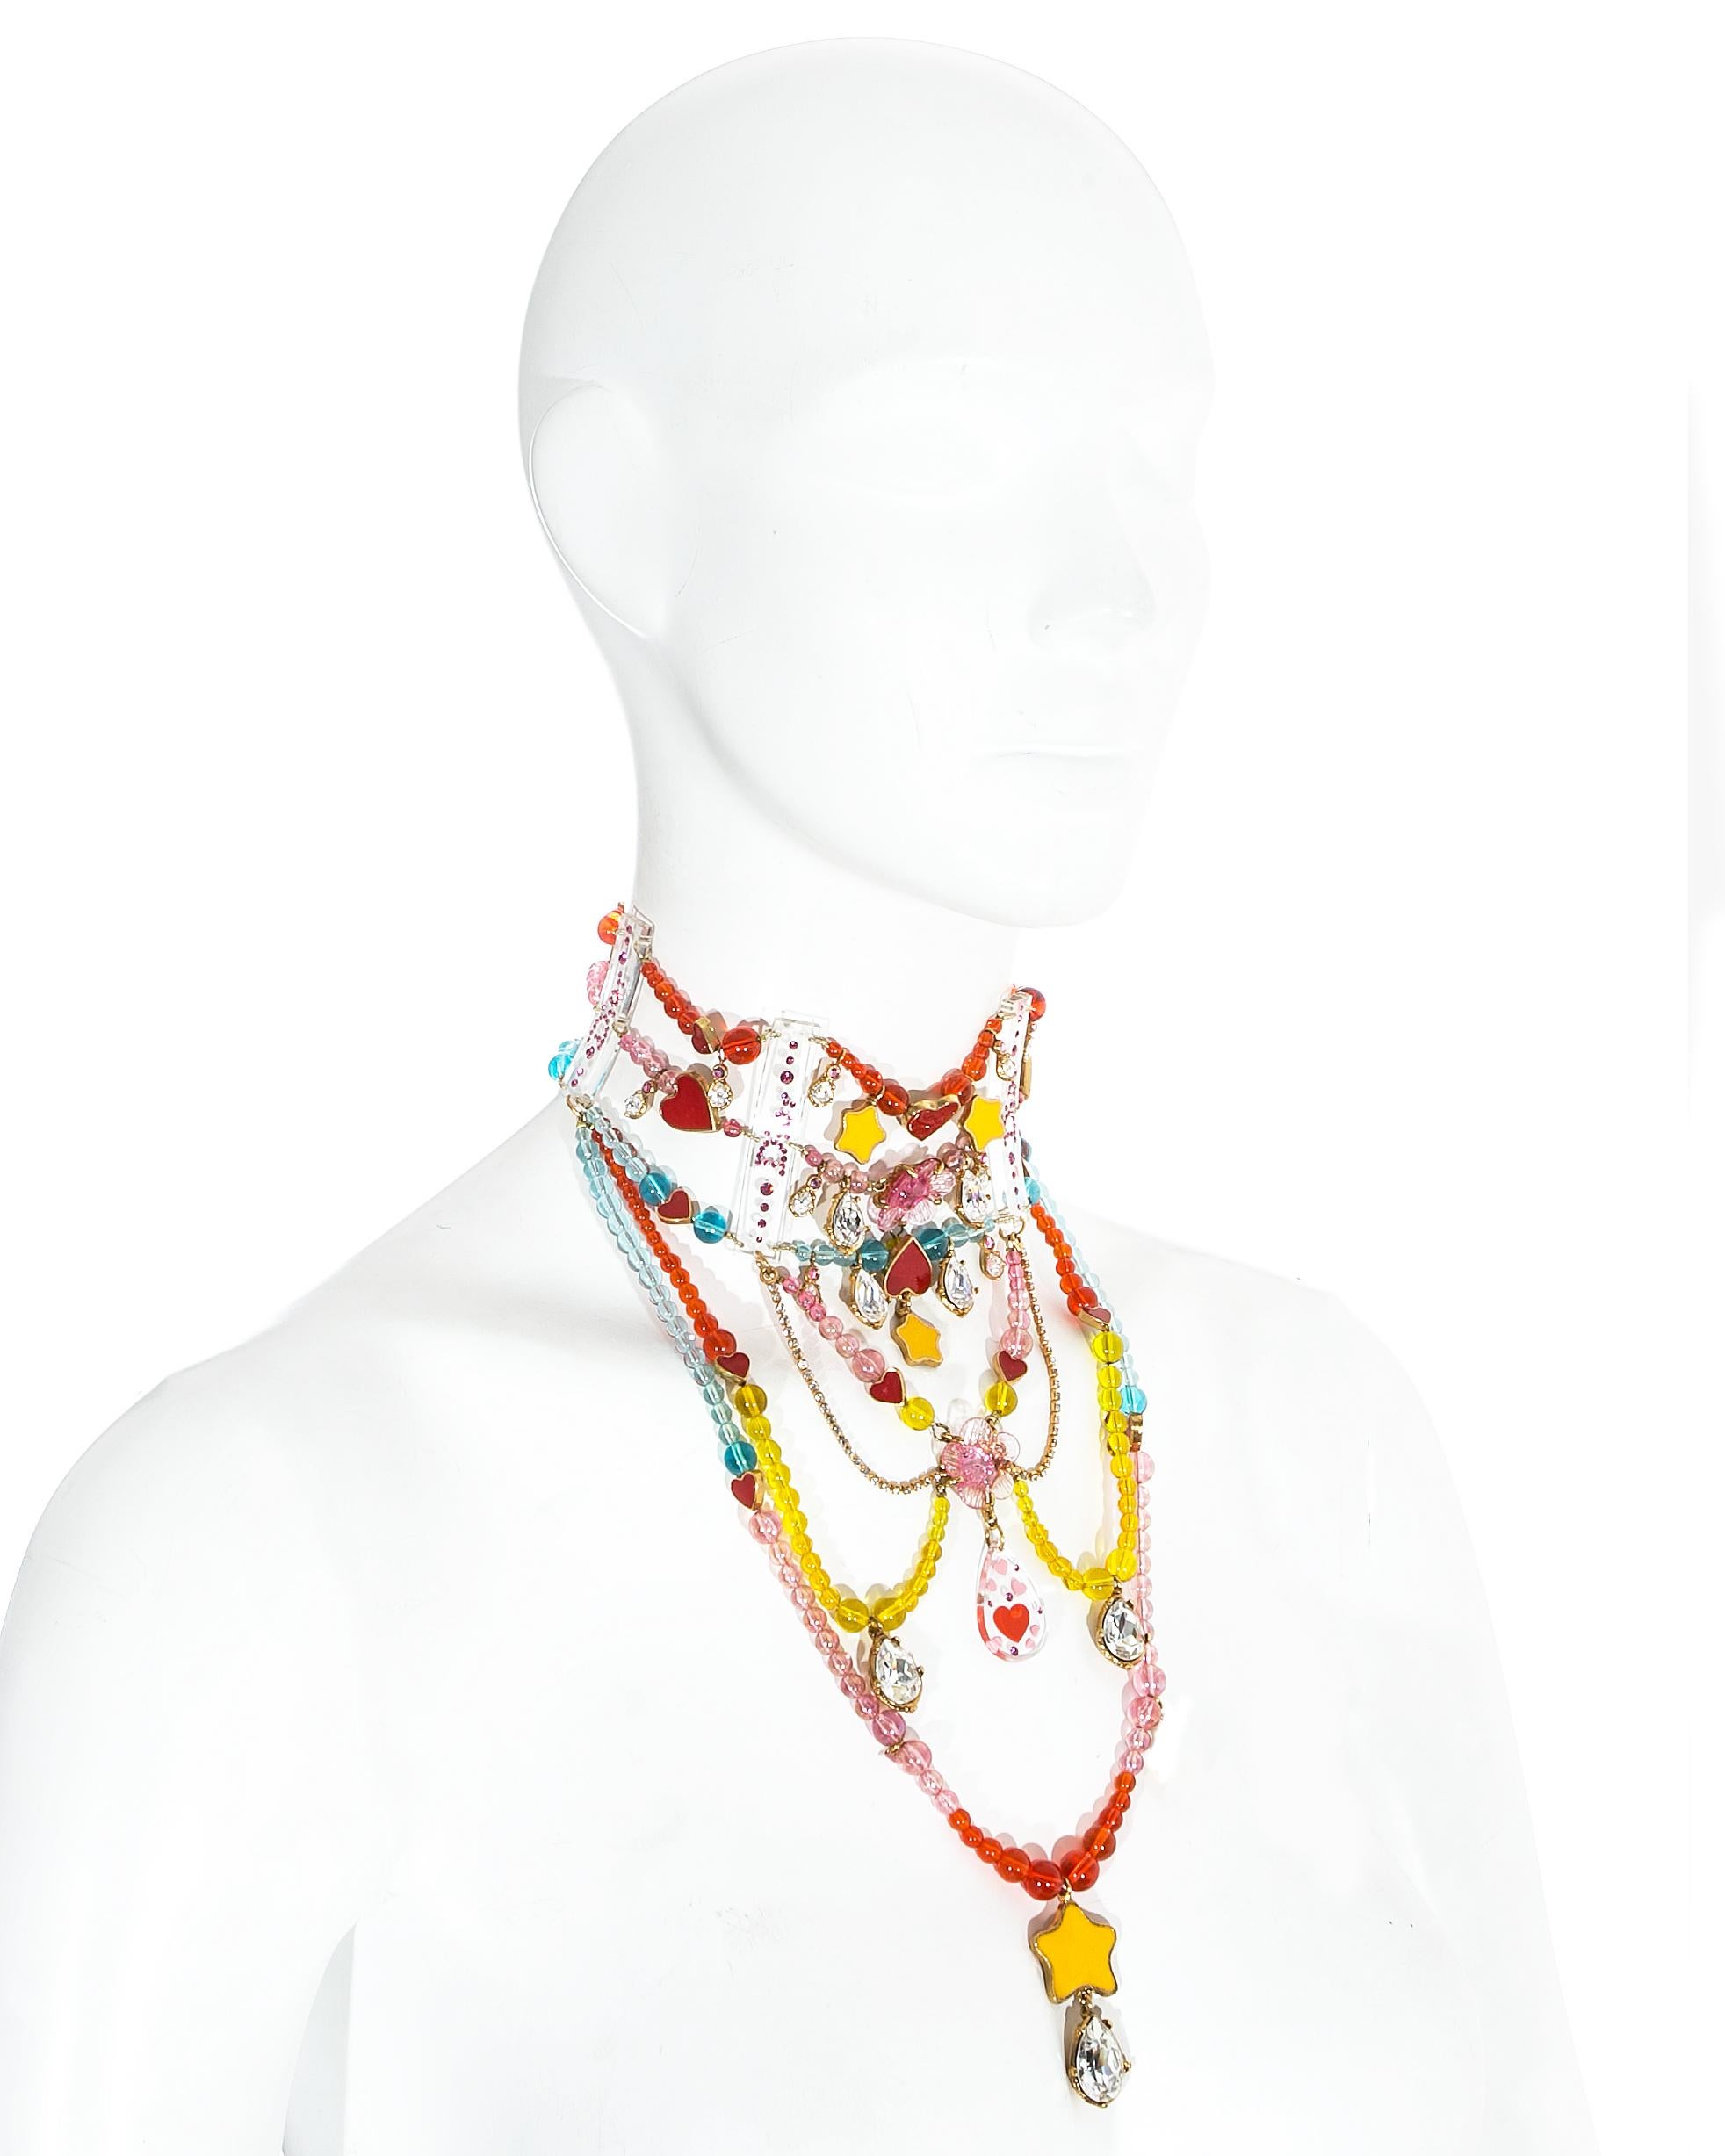 Women's Christian Dior by John Galliano Couture chandelier choker necklace, ca. 2001